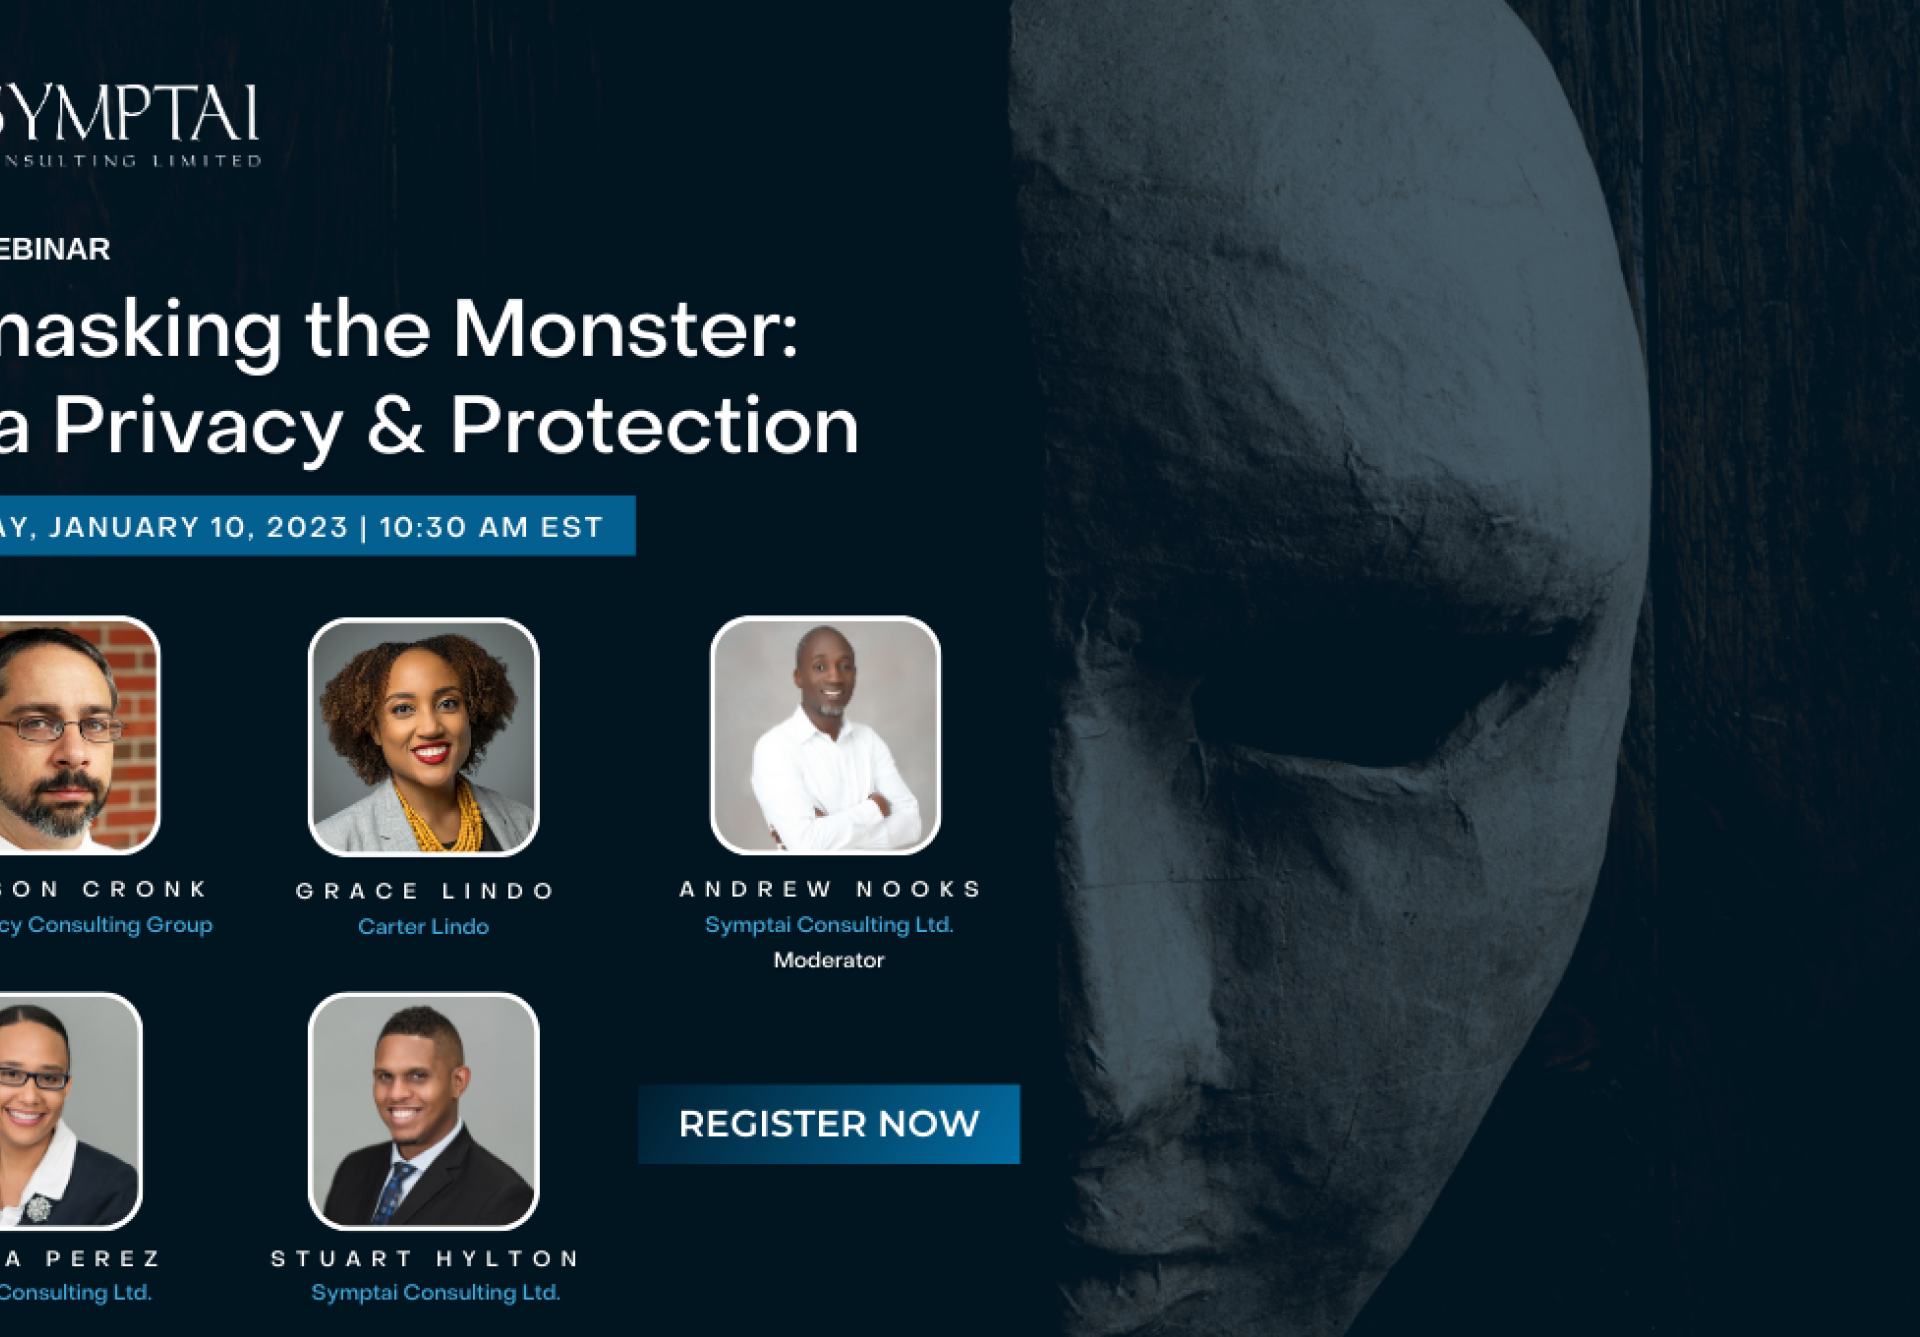 Unmasking the monster: Data privacy and protection